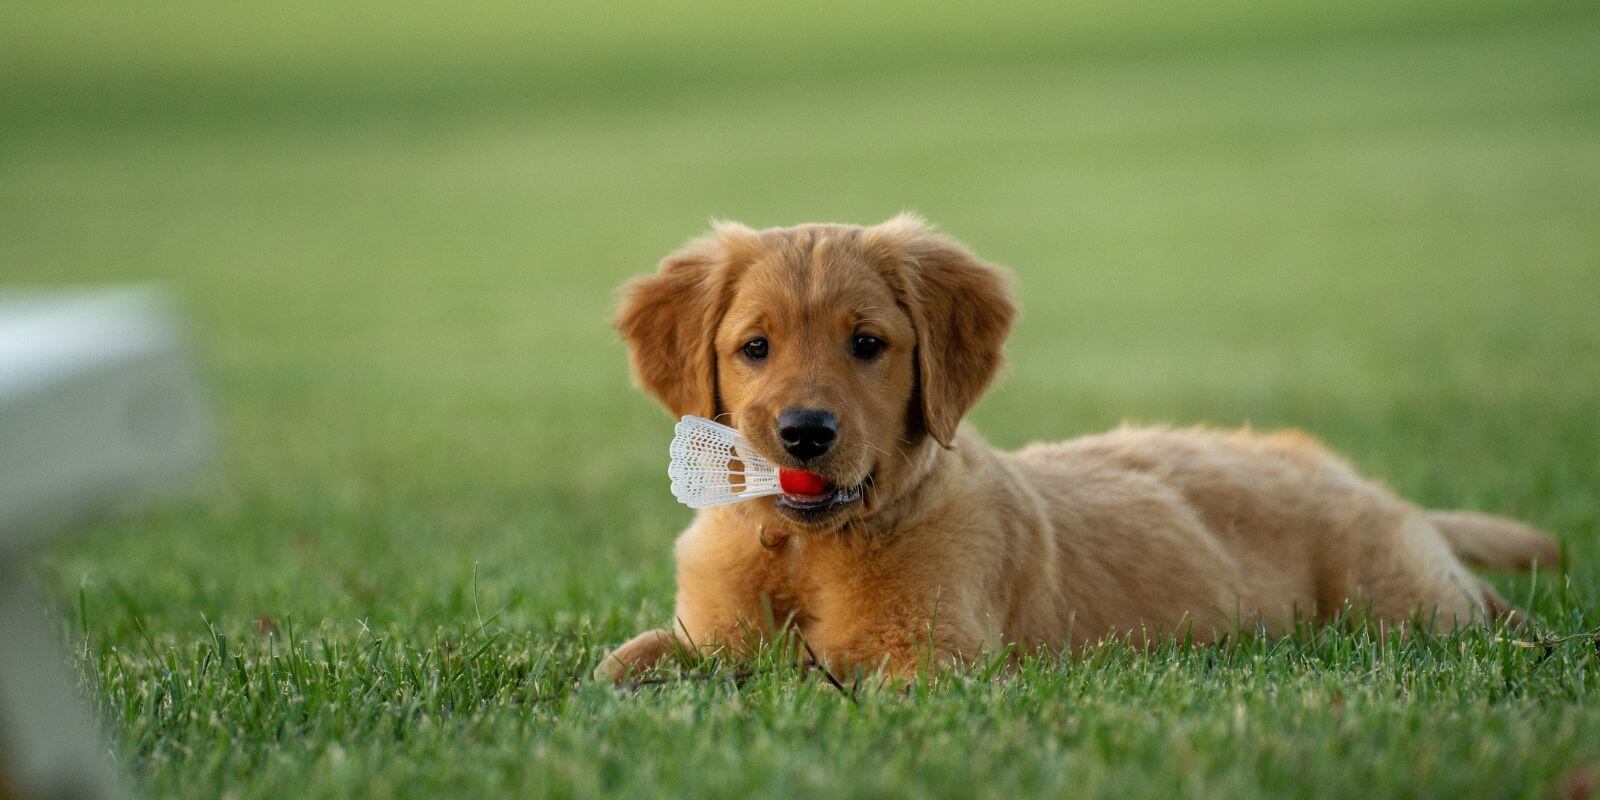 Golden Retriever puppy with toy in mouth 